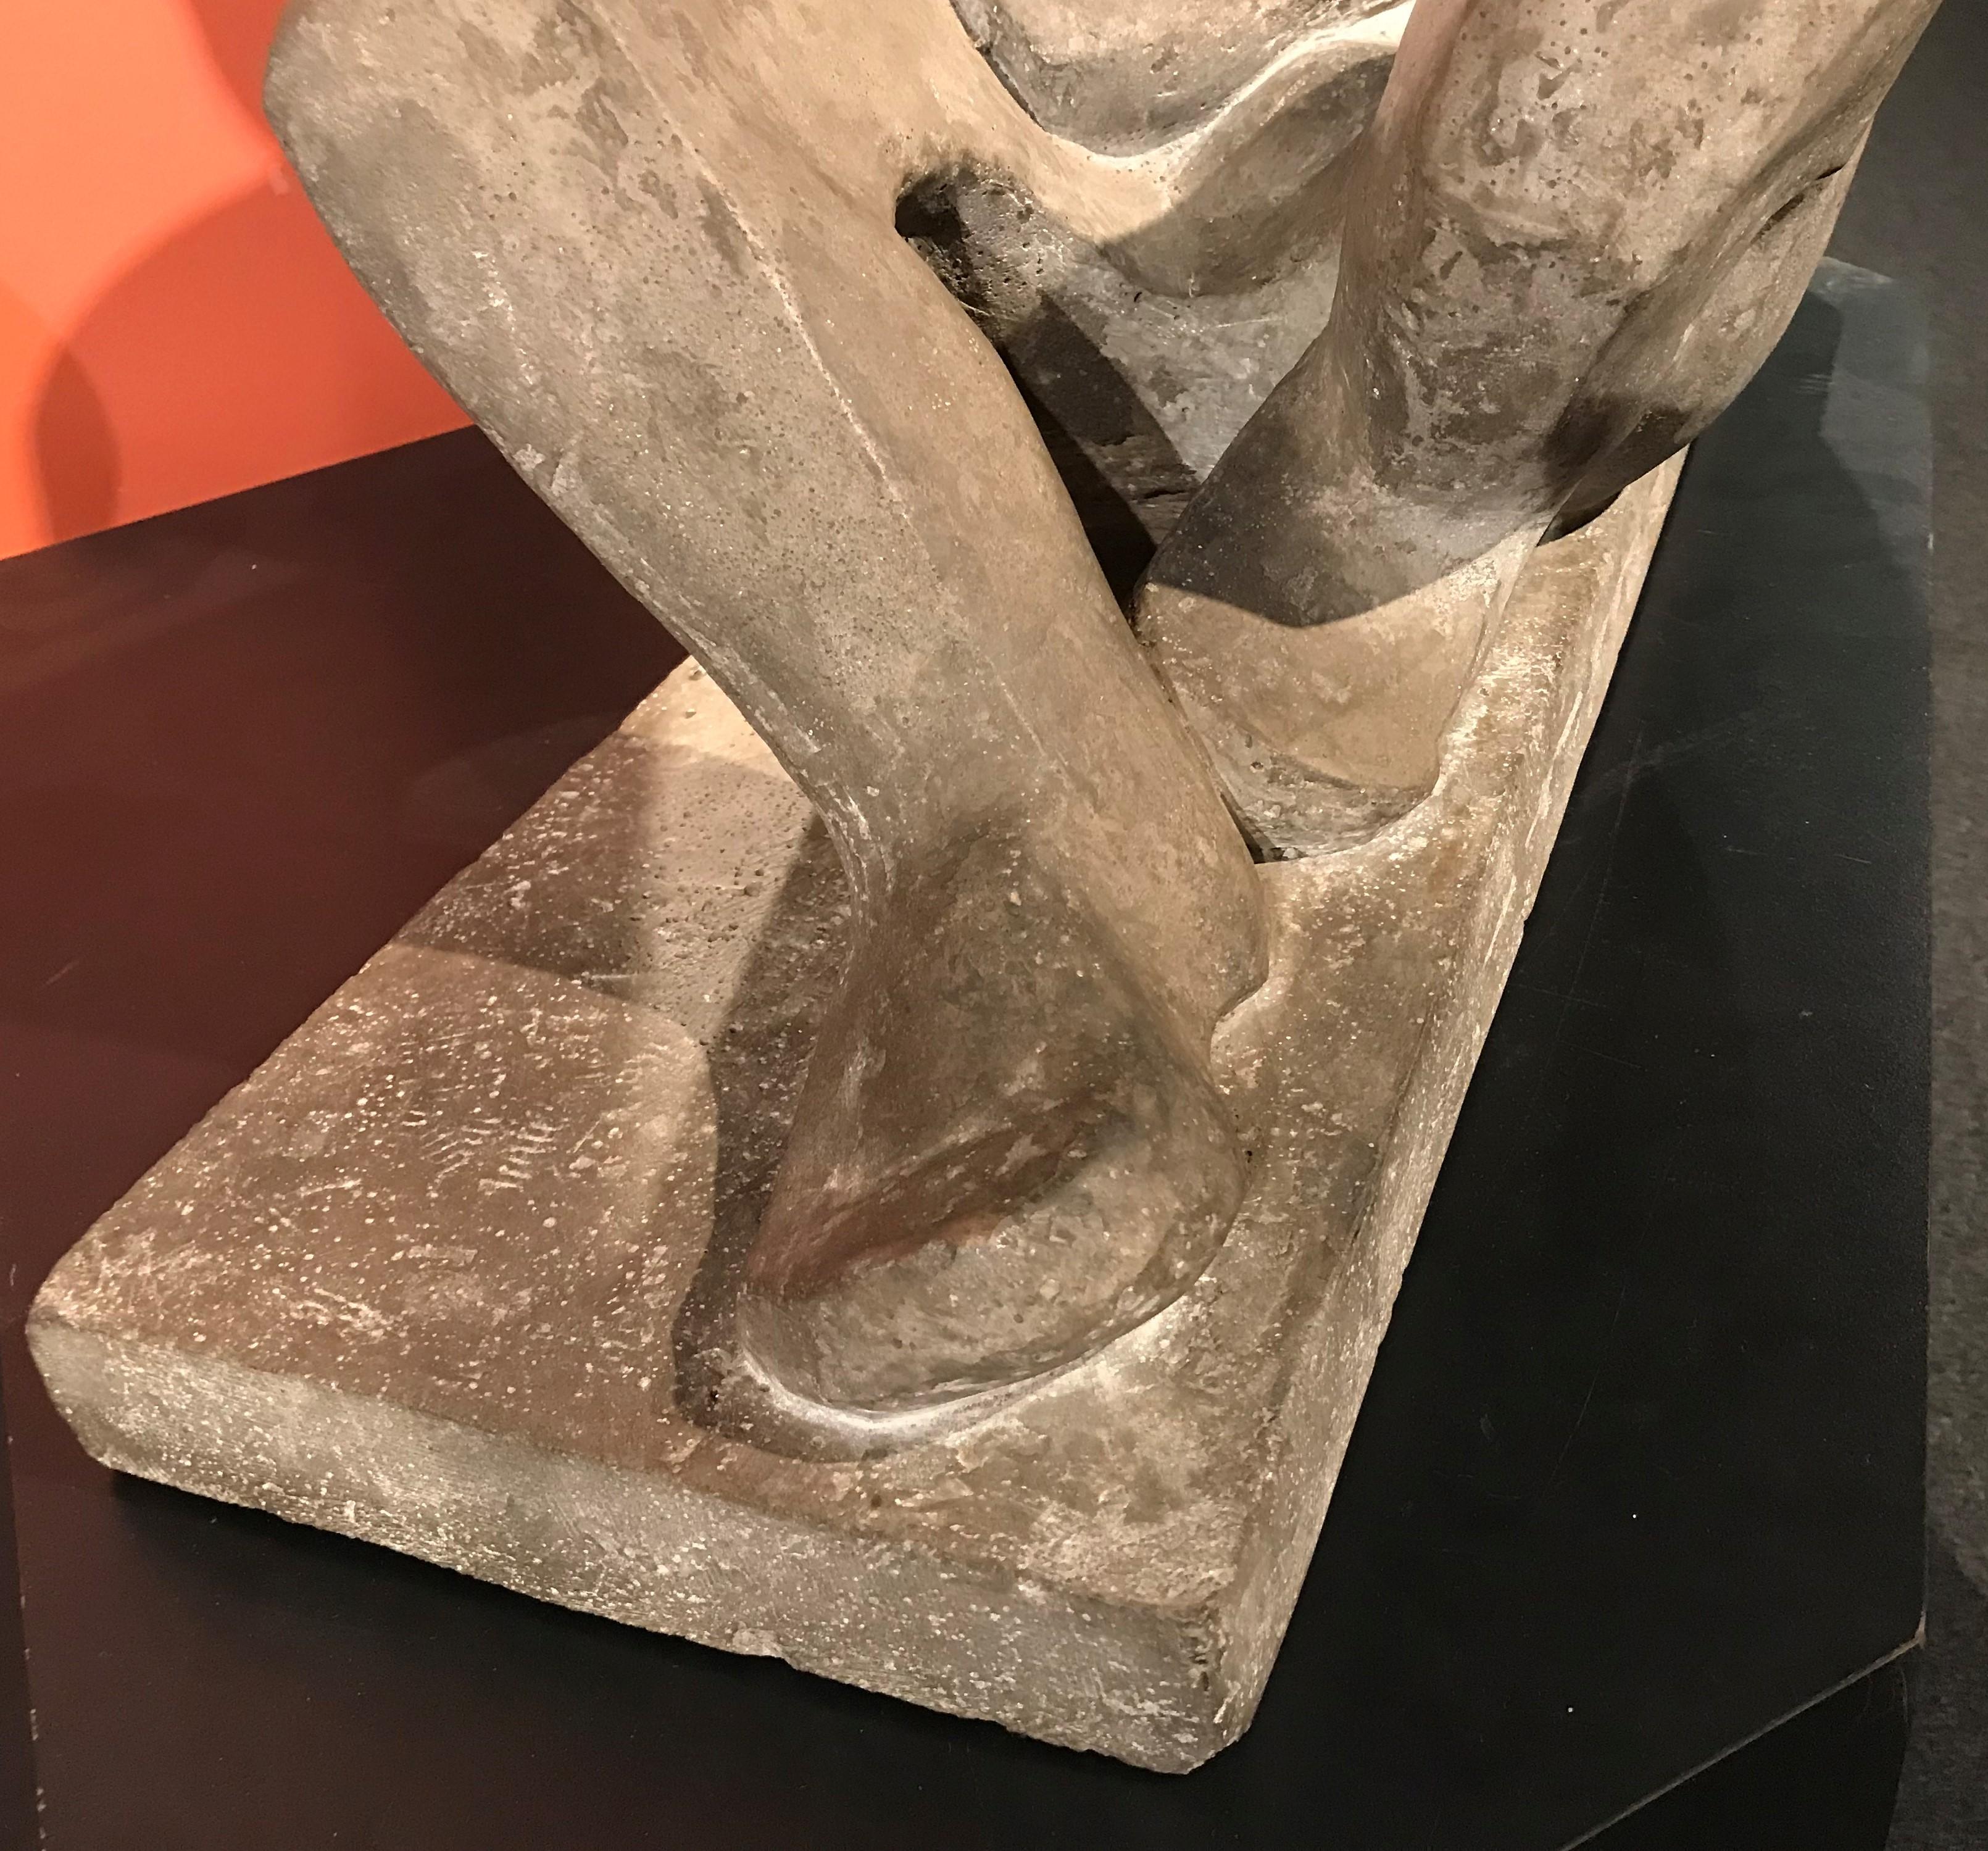 A fine cubist unsigned sculpture titled “Reclining Woman” by American artist Peter Winslow Milton (b. 1930). Milton was born in Lower Marion, Pennsylvania and is best known as one of America’s top tier printmakers. The artist commented on the